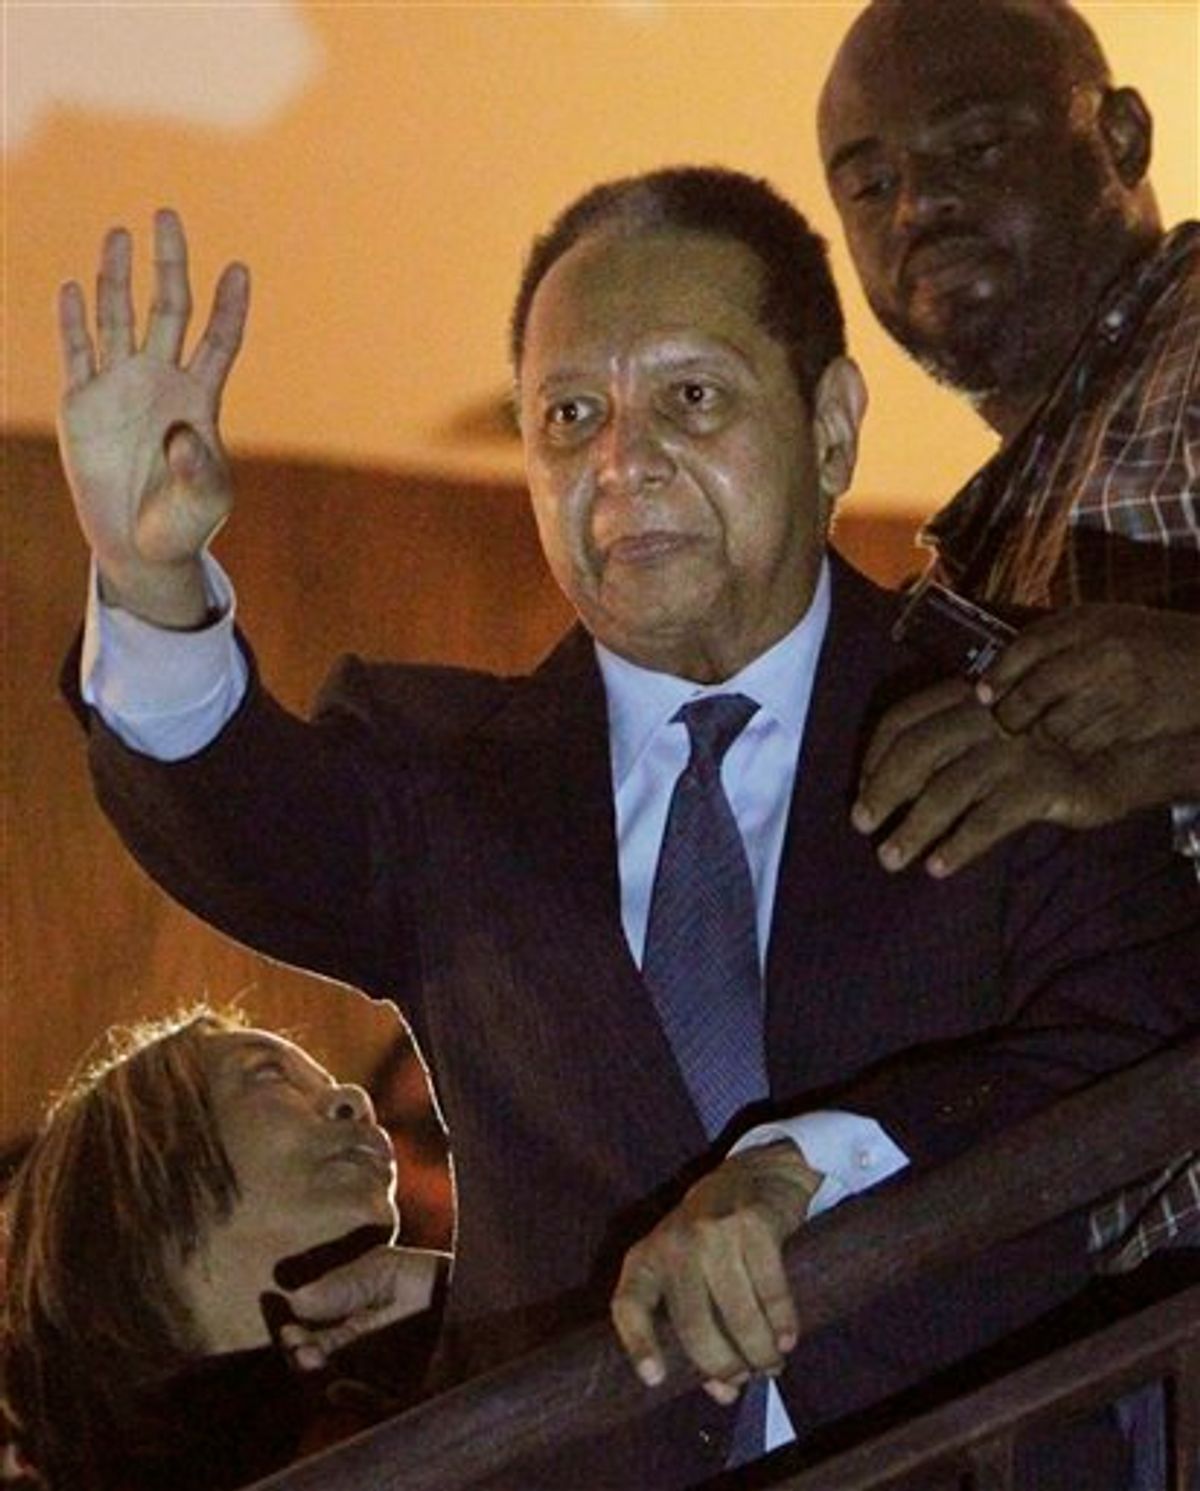 ALTERNATIVE CROP OF PAP109 - Haiti's former dictator Jean-Claude "Baby Doc" Duvalier, center, waves to supporters from a hotel balcony after his arrival in Port-au-Prince, Haiti, Sunday Jan. 16, 2011. Duvalier returned Sunday to Haiti after nearly 25 years in exile, a surprising and perplexing move that comes as his country struggles with a political crisis and the stalled effort to recover from last year's devastating earthquake. (AP Photo/Dieu Nalio Chery) (AP)